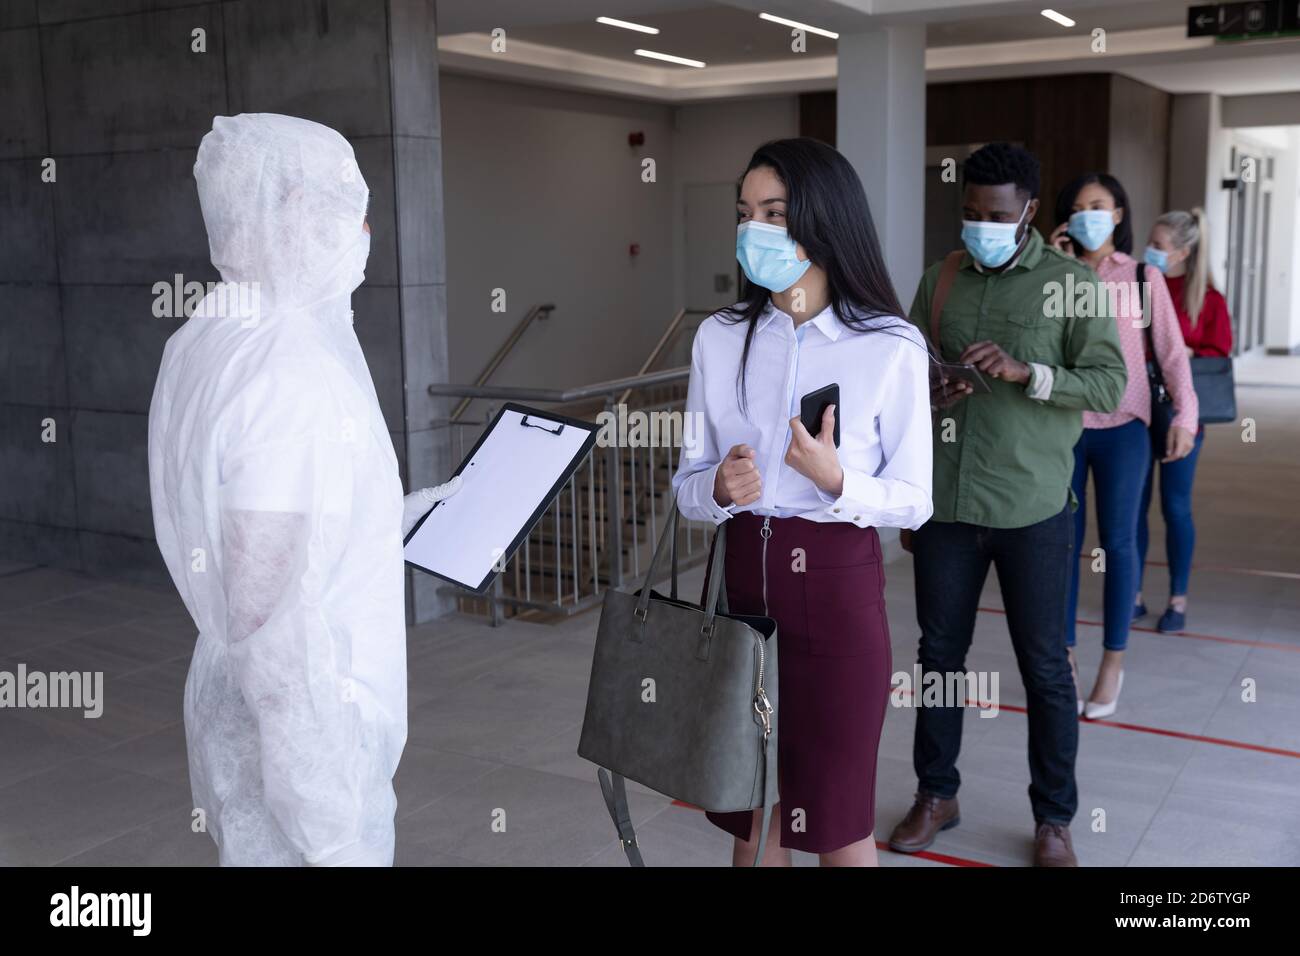 Group of people wearing face masks standing in queue Stock Photo